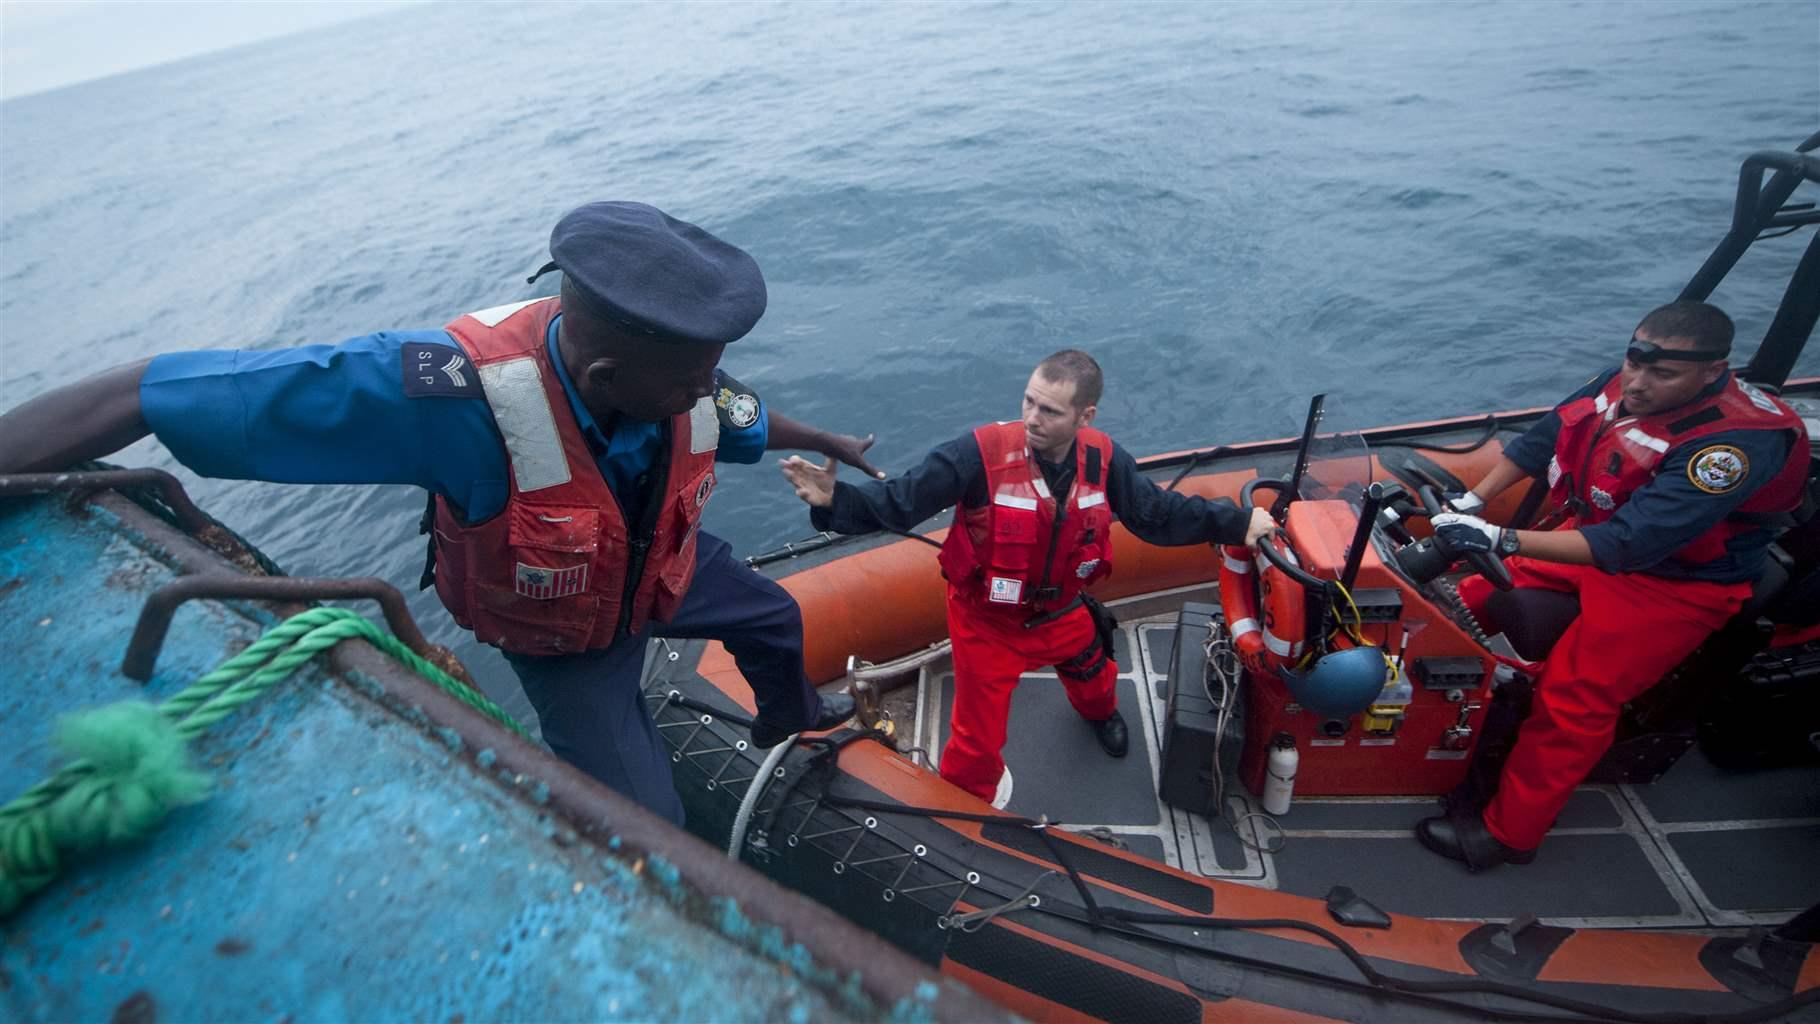 A Black man in military uniform descends from the blue deck of what appears to be a large boat into a smaller, orange, rubber boat, where a White man is extending a hand to help. Another Black man is at the wheel of the orange boat. All three men are wearing life jackets. 